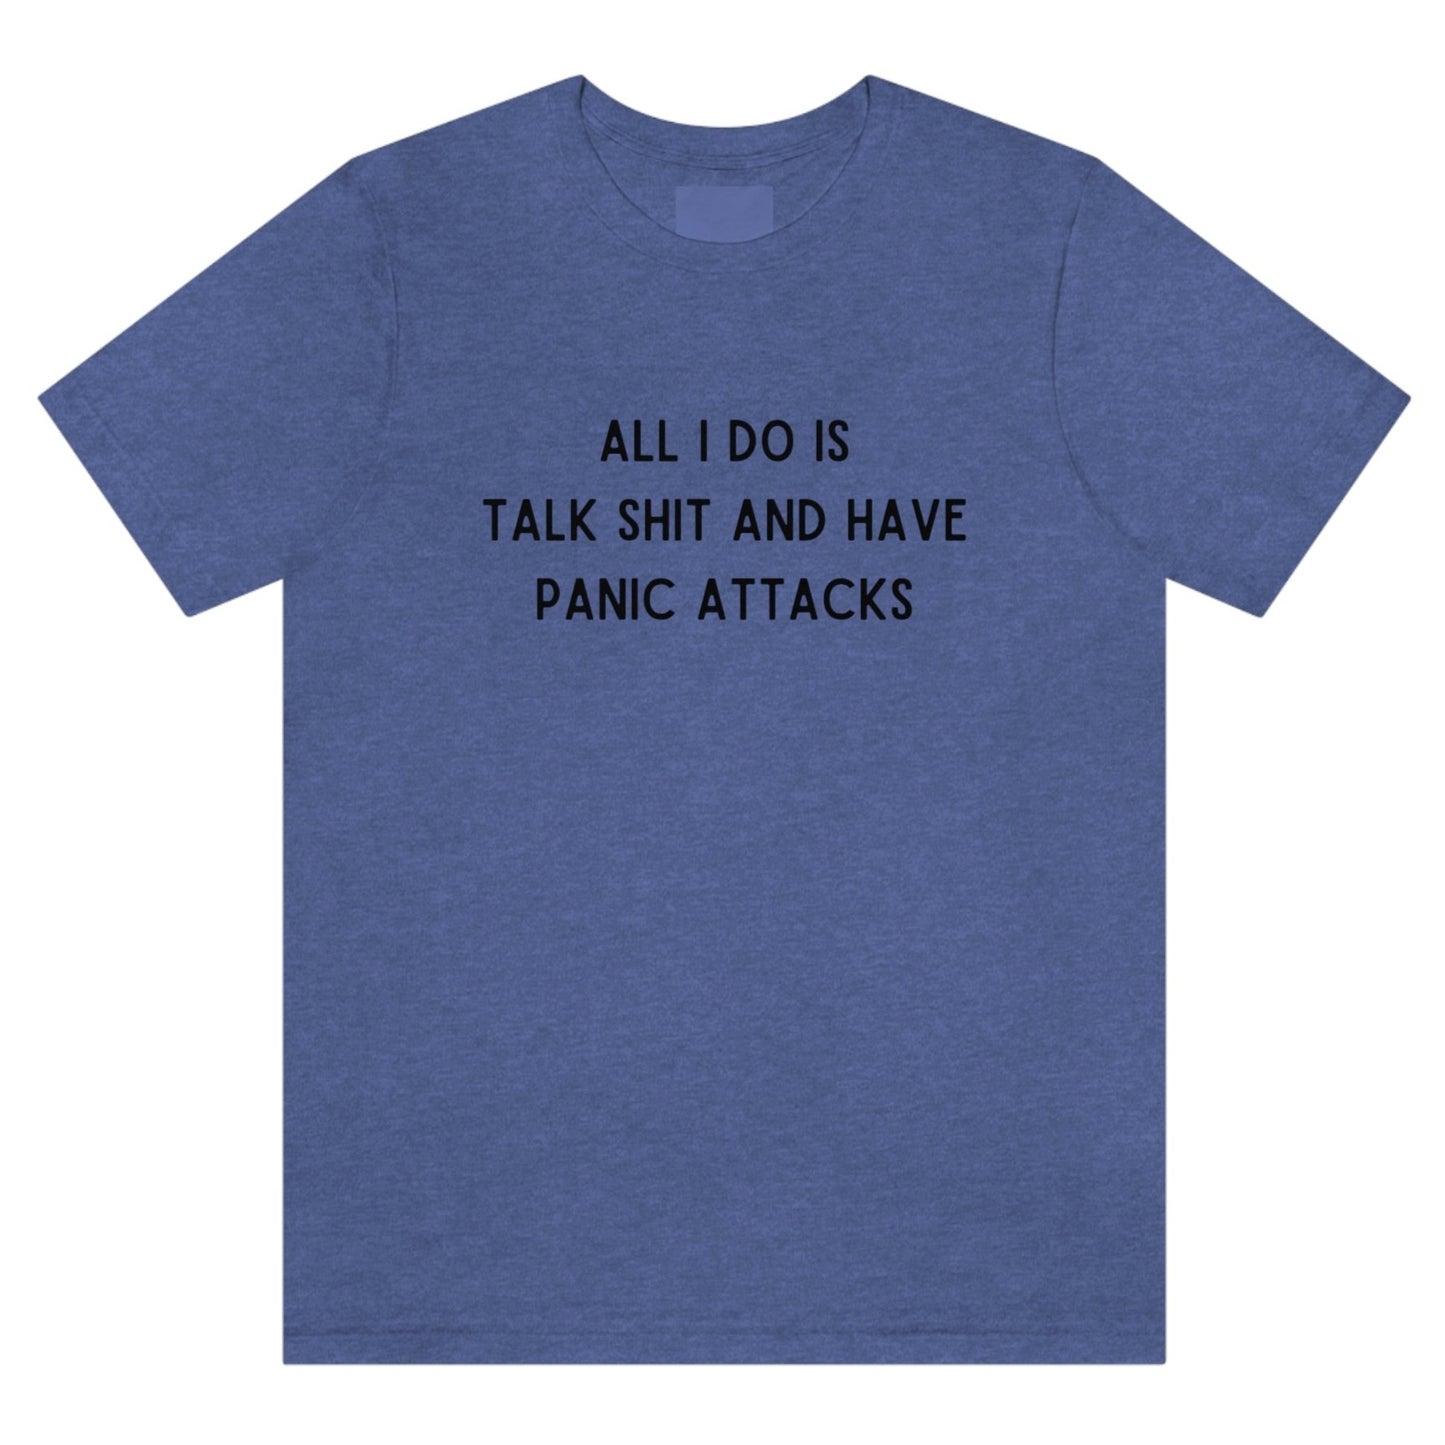 all-i-do-is-talk-shit-and-have-panic-attacks-heather-true-navy-blue-t-shirt-funny-unisex